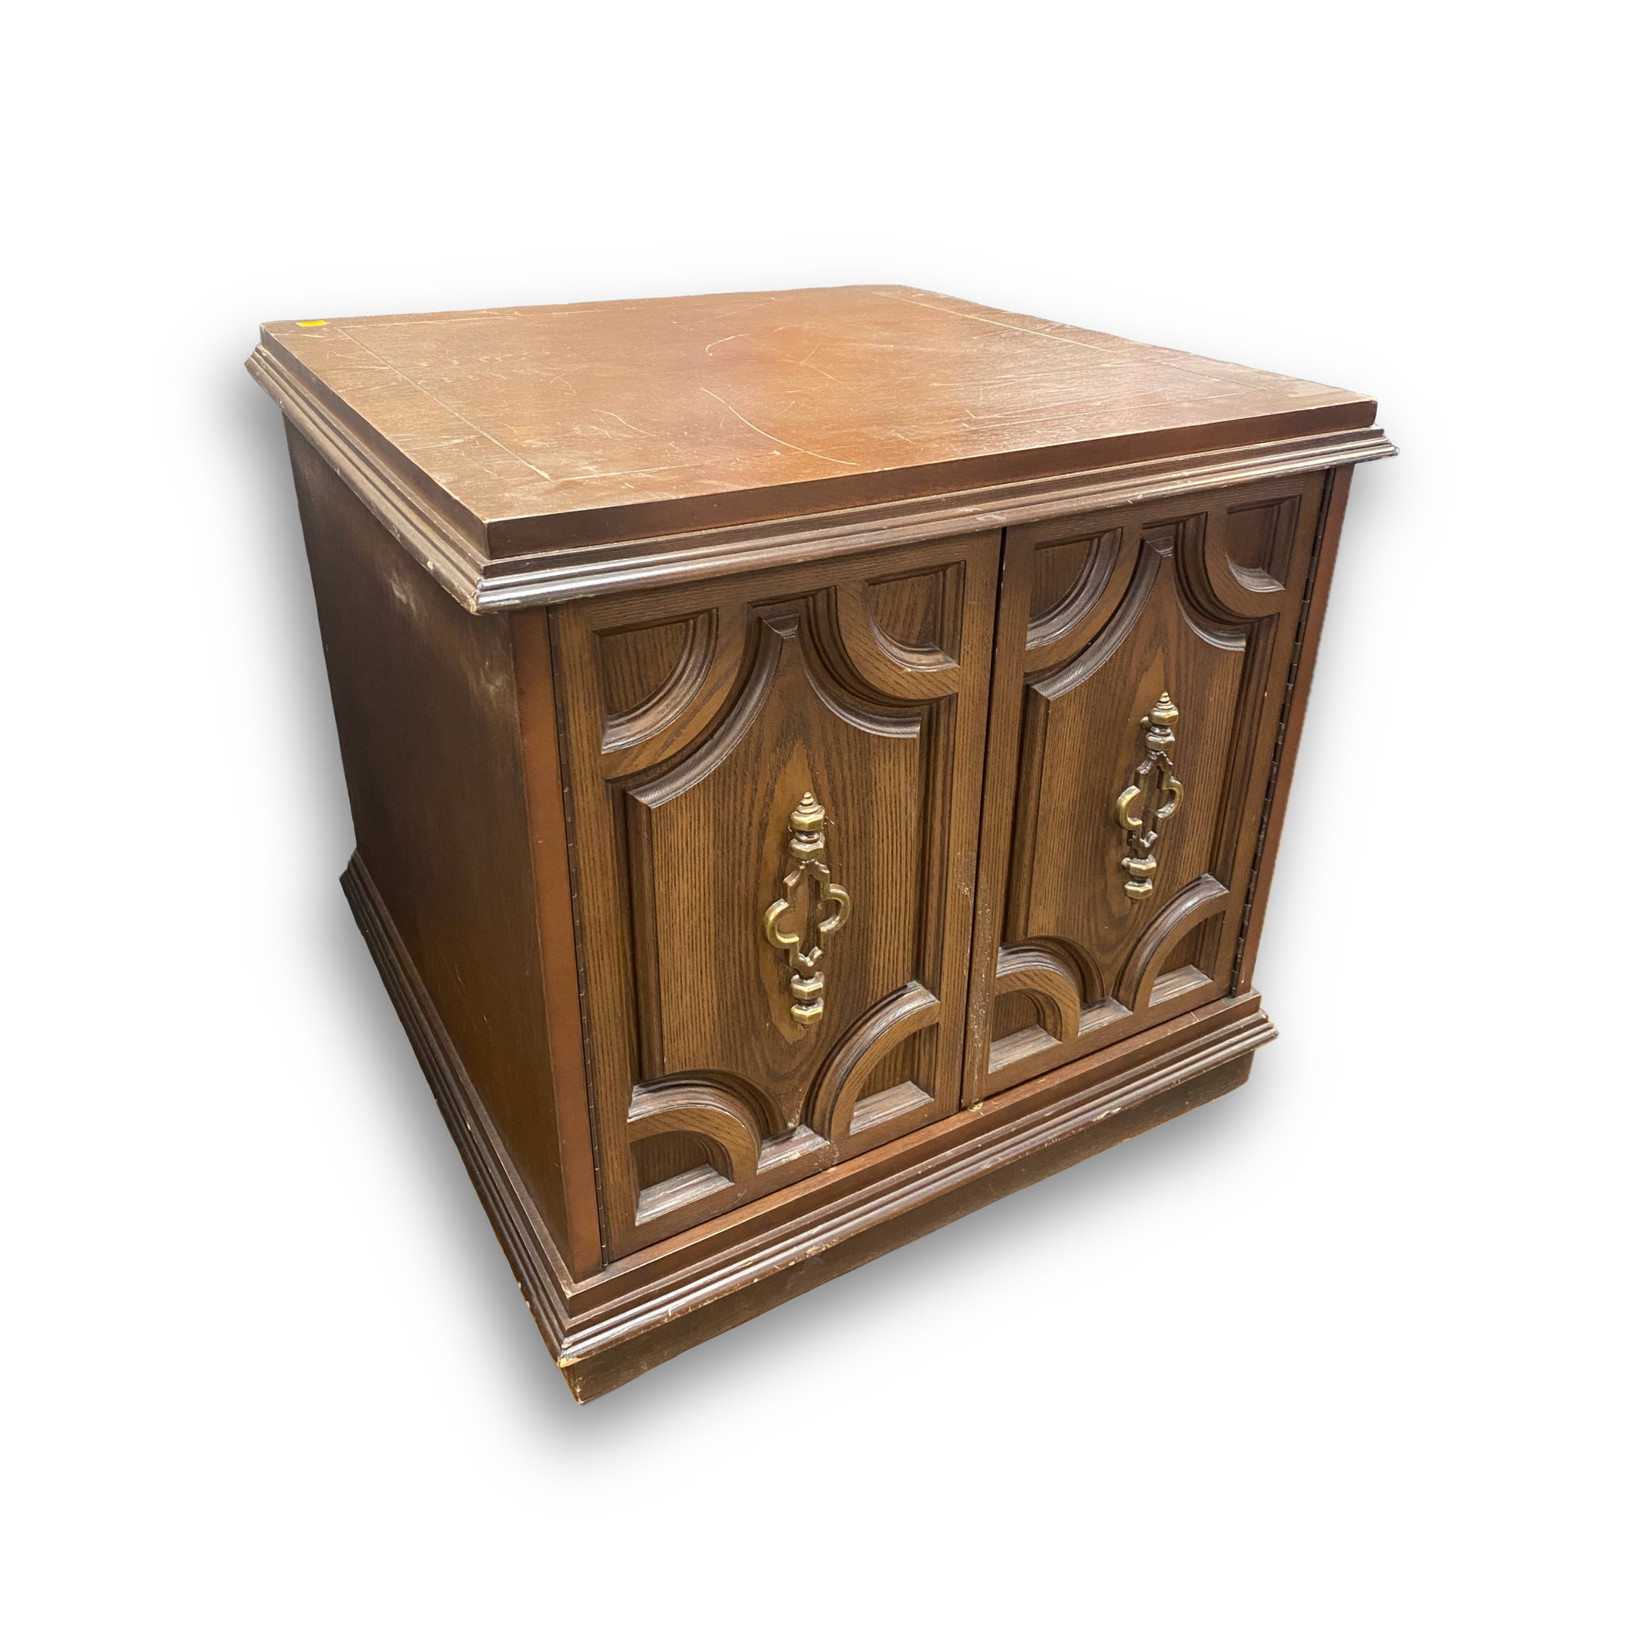 Antique-Style Endtable